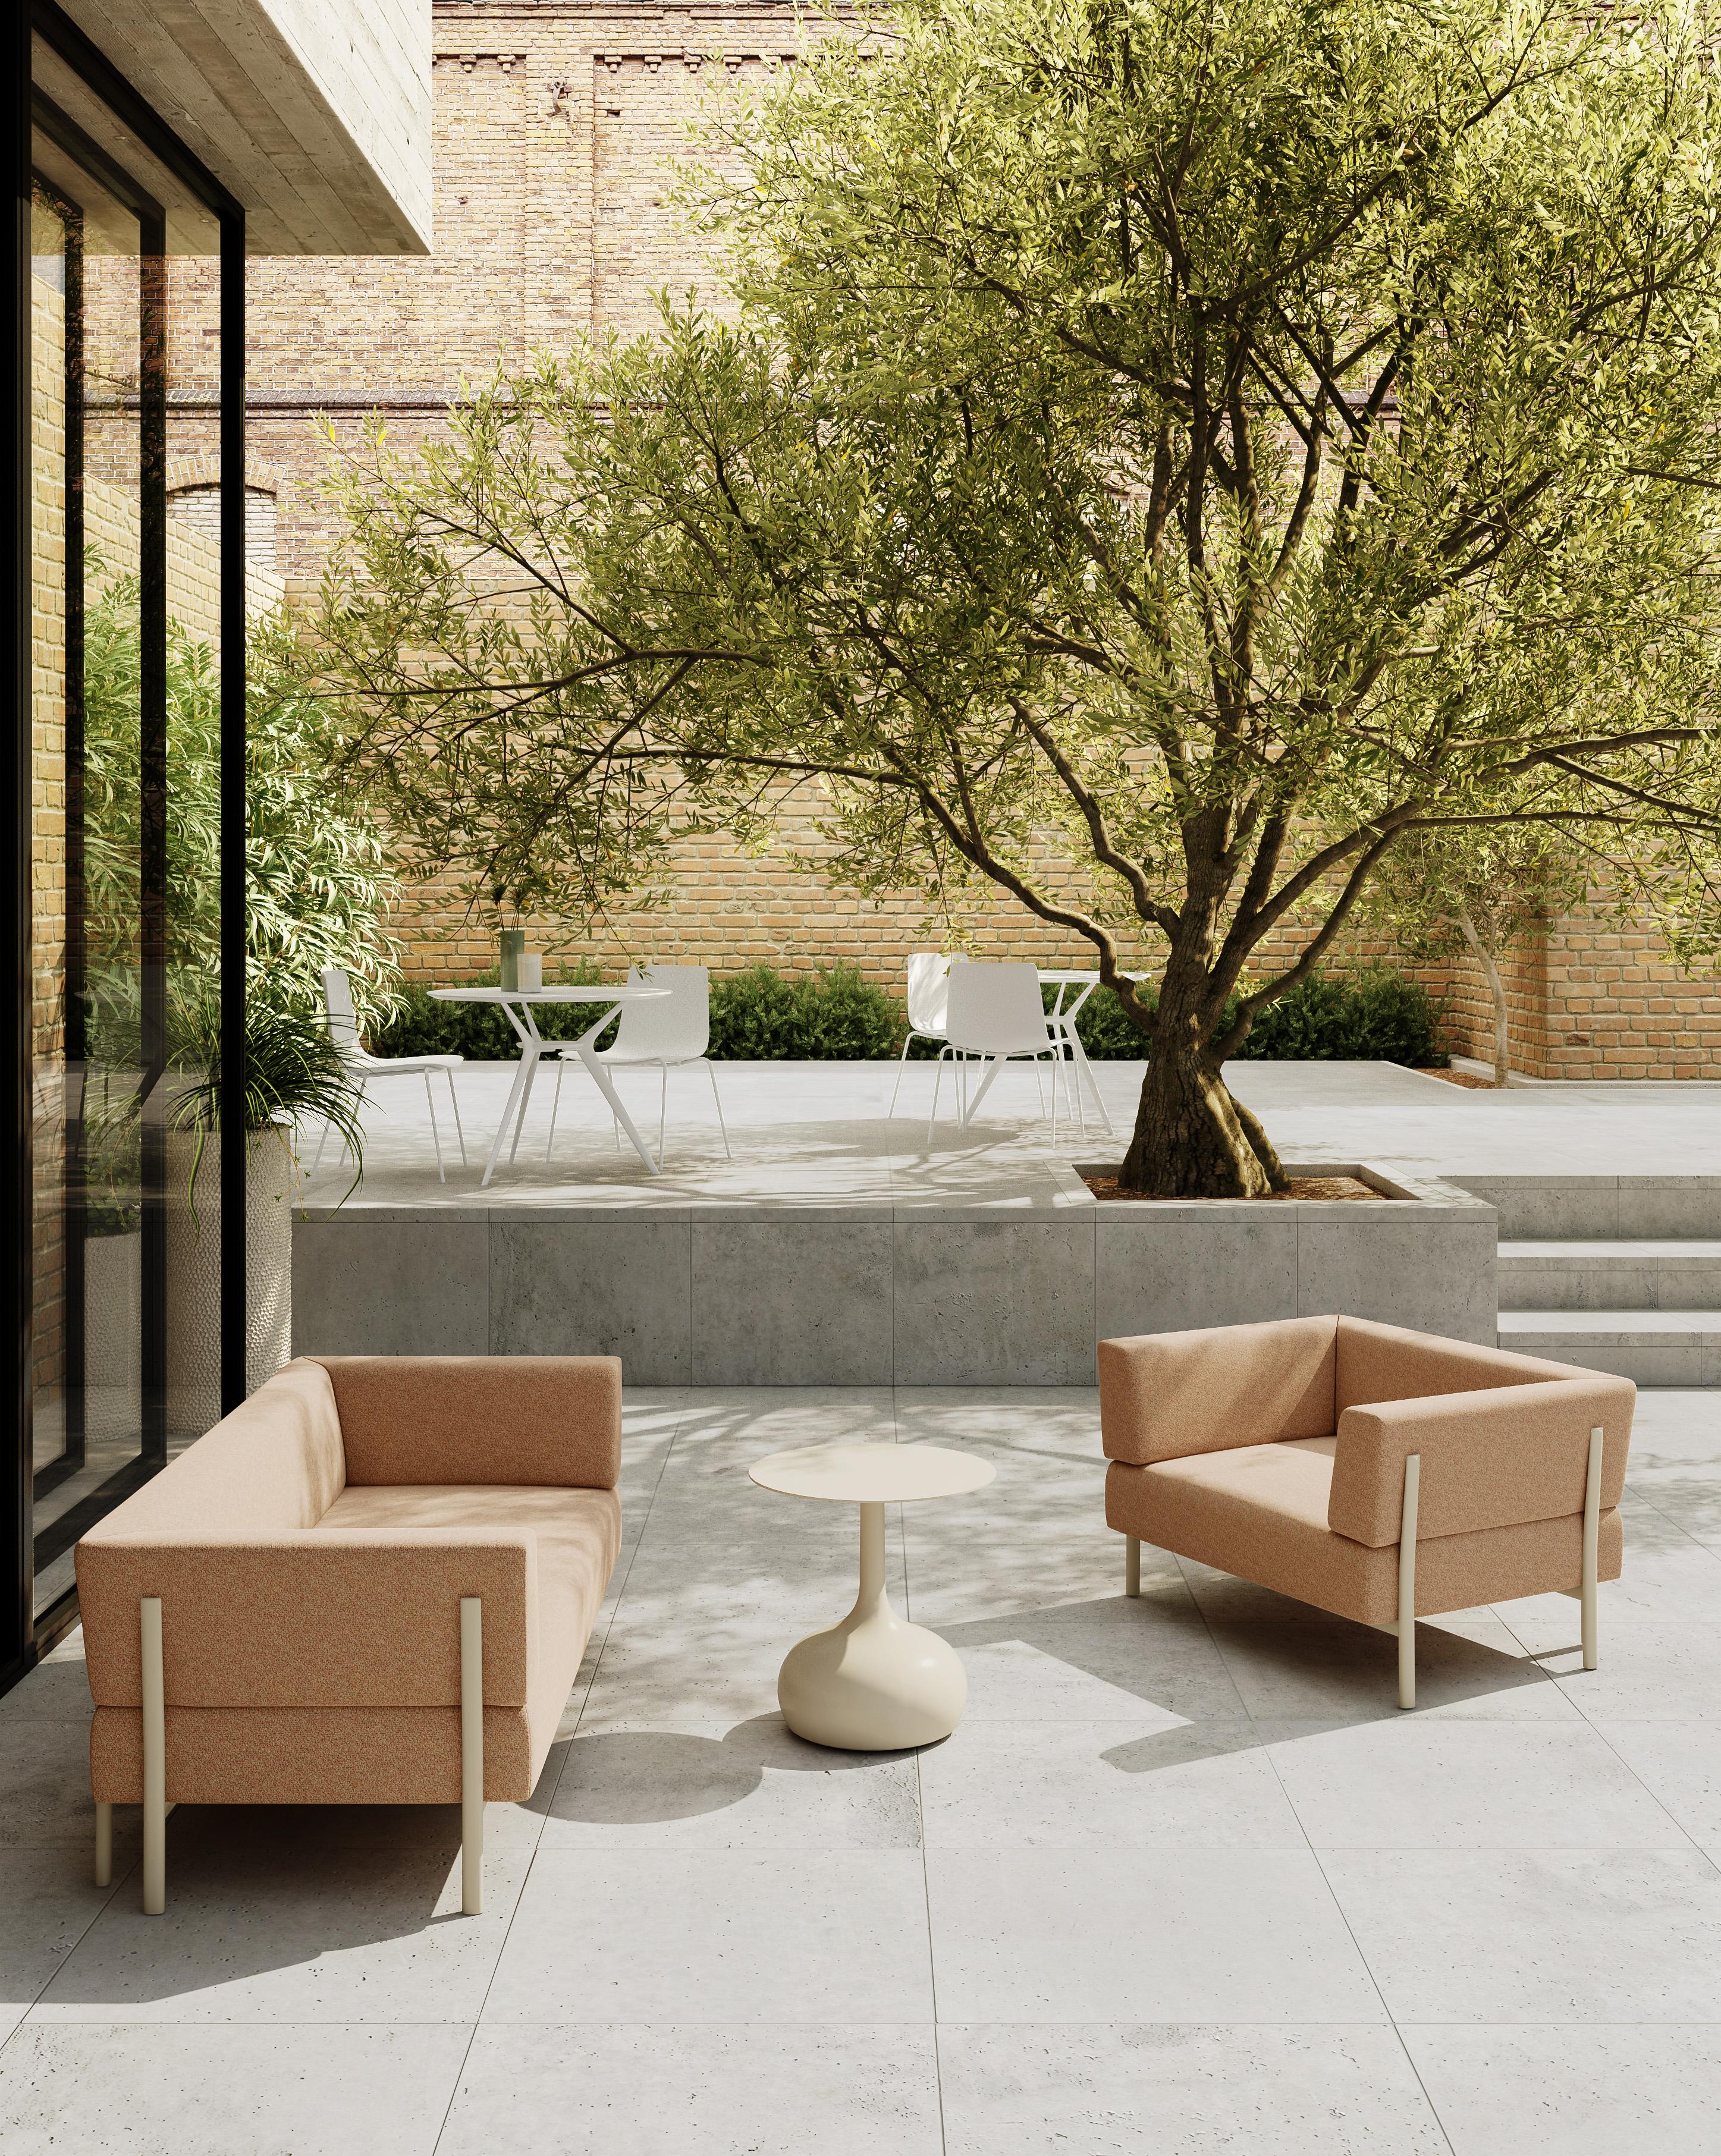 Alias T02_O Ten 2 Seater Outdoor Sofa in Dark Grey and White Lacquered Aluminum Frame by PearsonLloyd

Two-seater sofa for outdoor use with lacquered die-cast aluminium legs and stainless steel frame.Seat, back and armrests with removable cover in